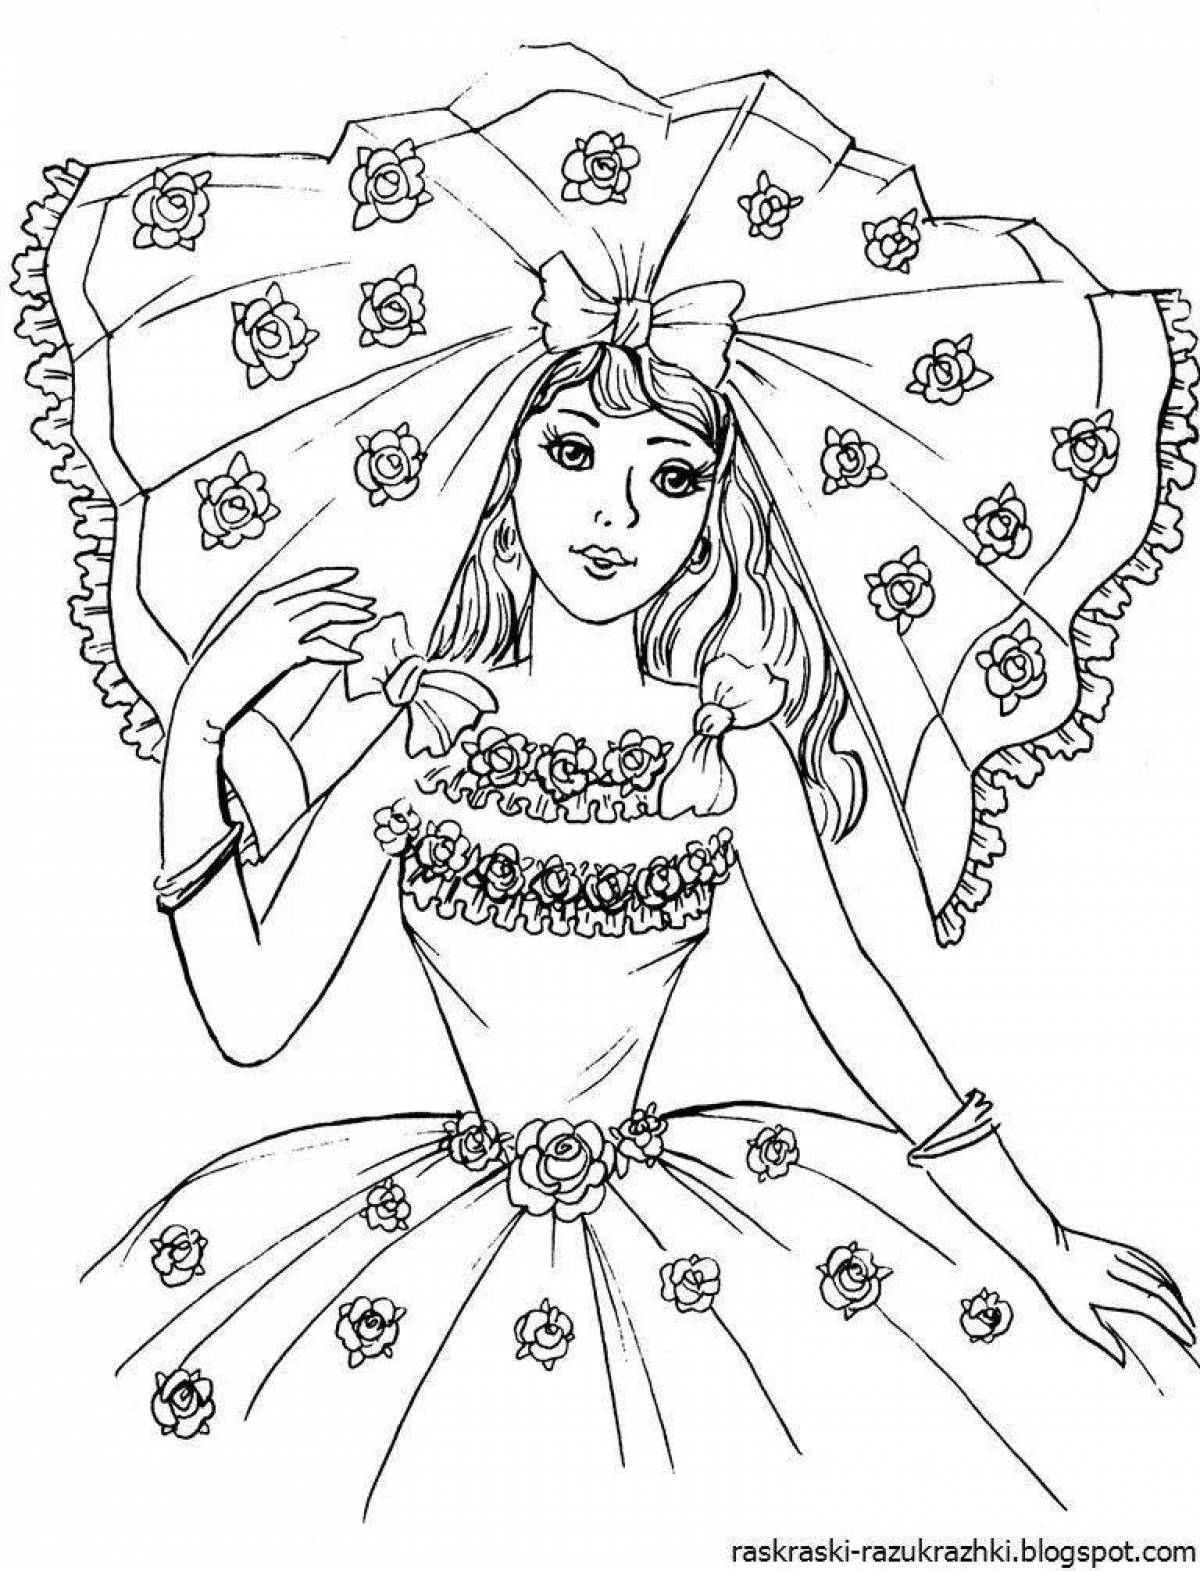 Charming coloring book for girls 10 years beautiful